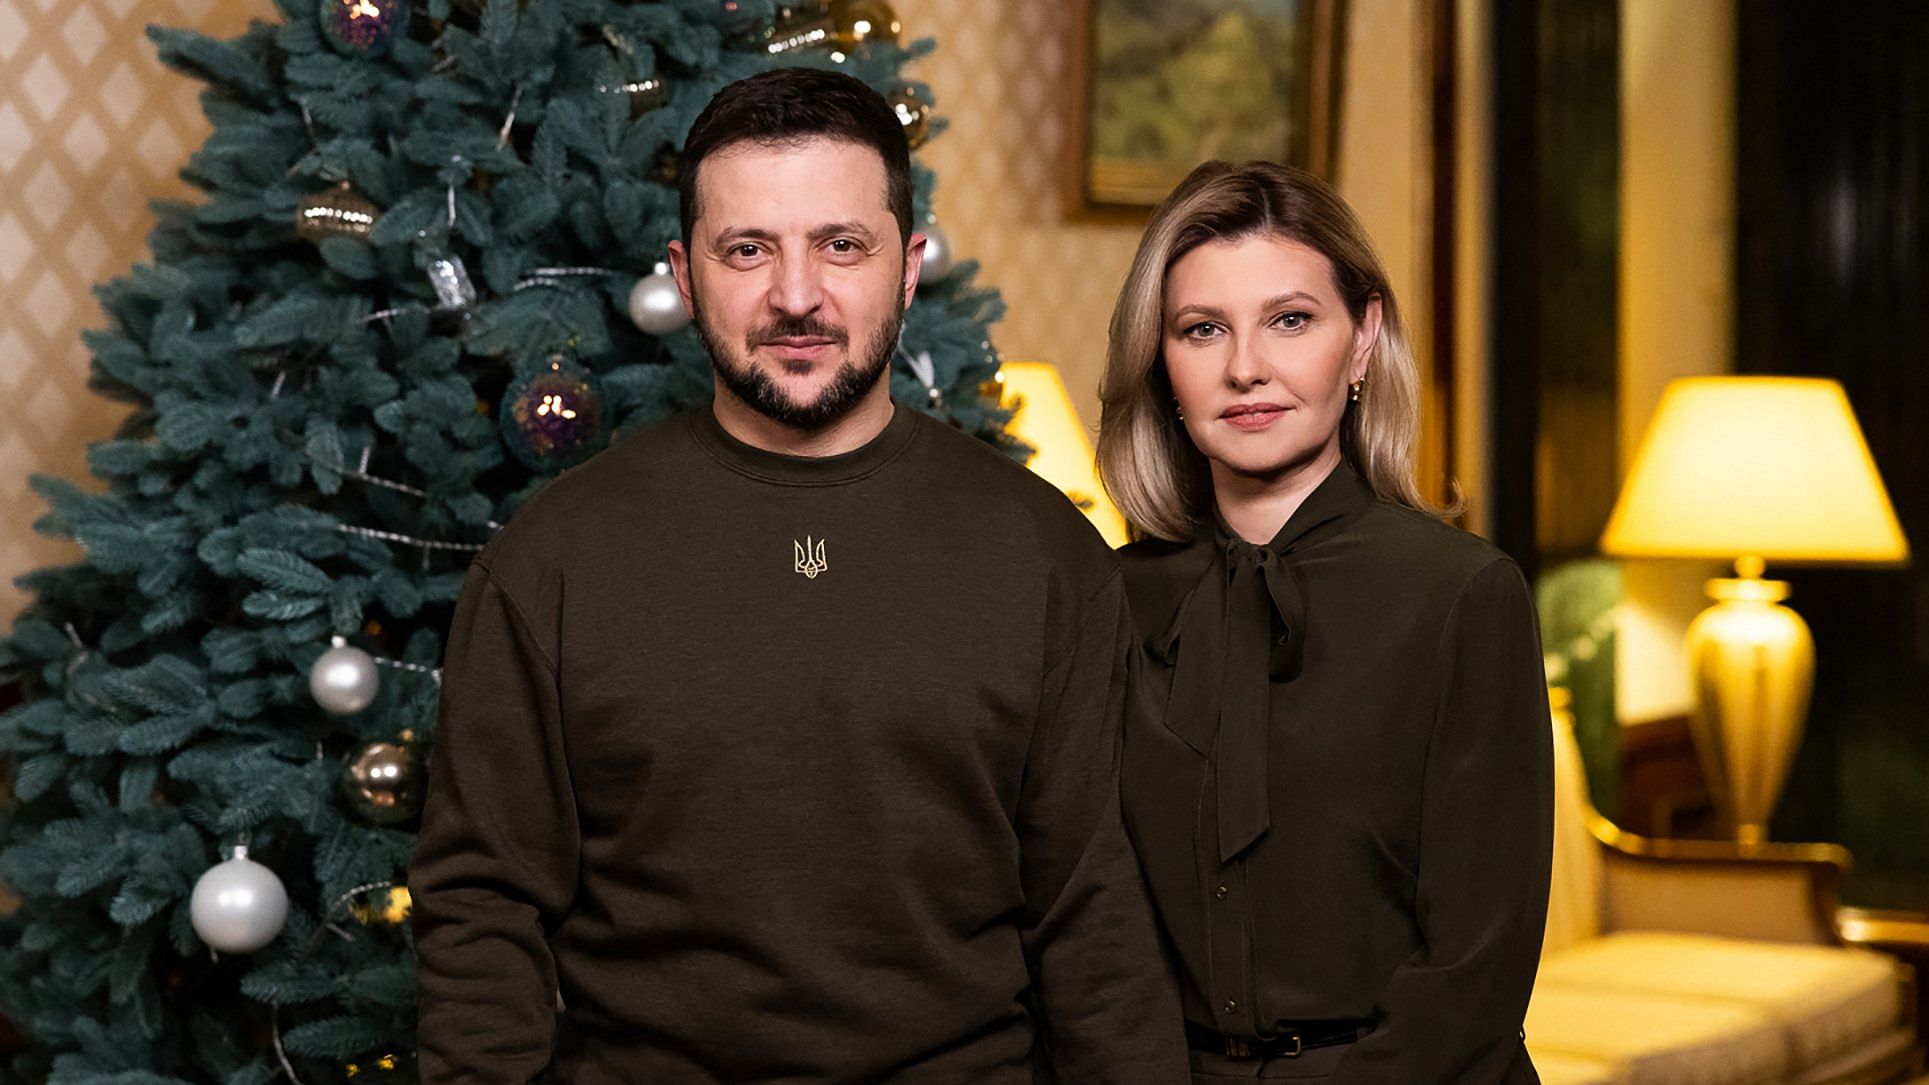 This handout picture taken and released by Ukrainian Presidential Office on December 31, 2022 shows the President Volodymyr Zelenskyy and his wife Olena during their New Year's address to Ukrainian people. Credit: AFP Photo